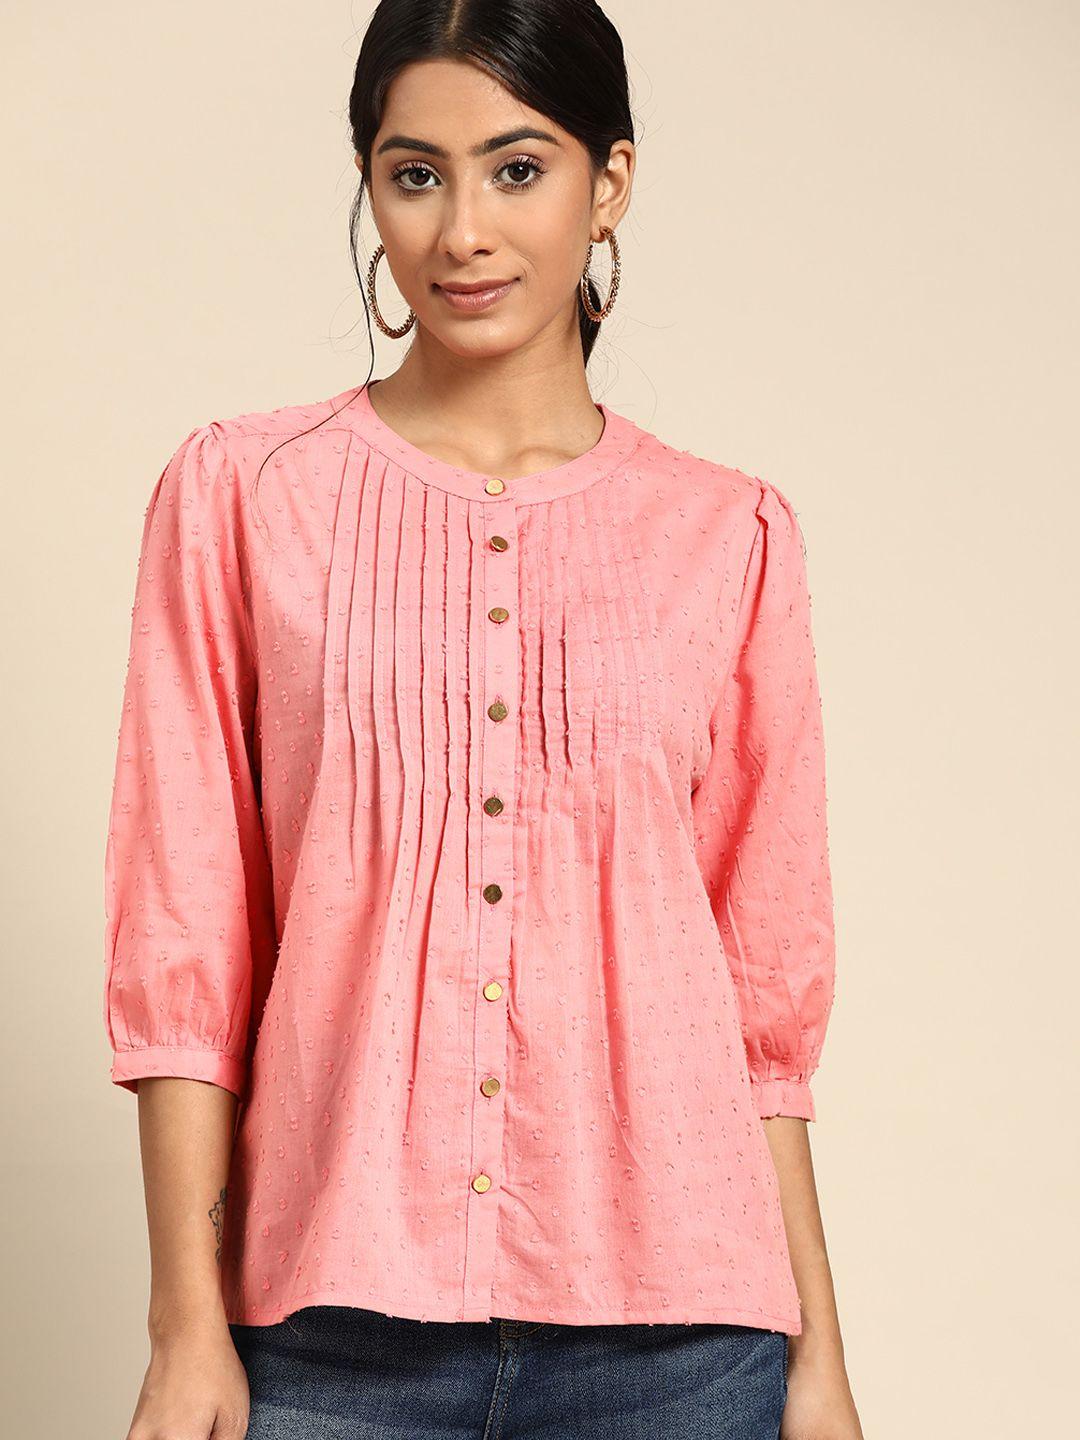 all-about-you-women-pink-dobby-weave-pure-cotton-shirt-style-top